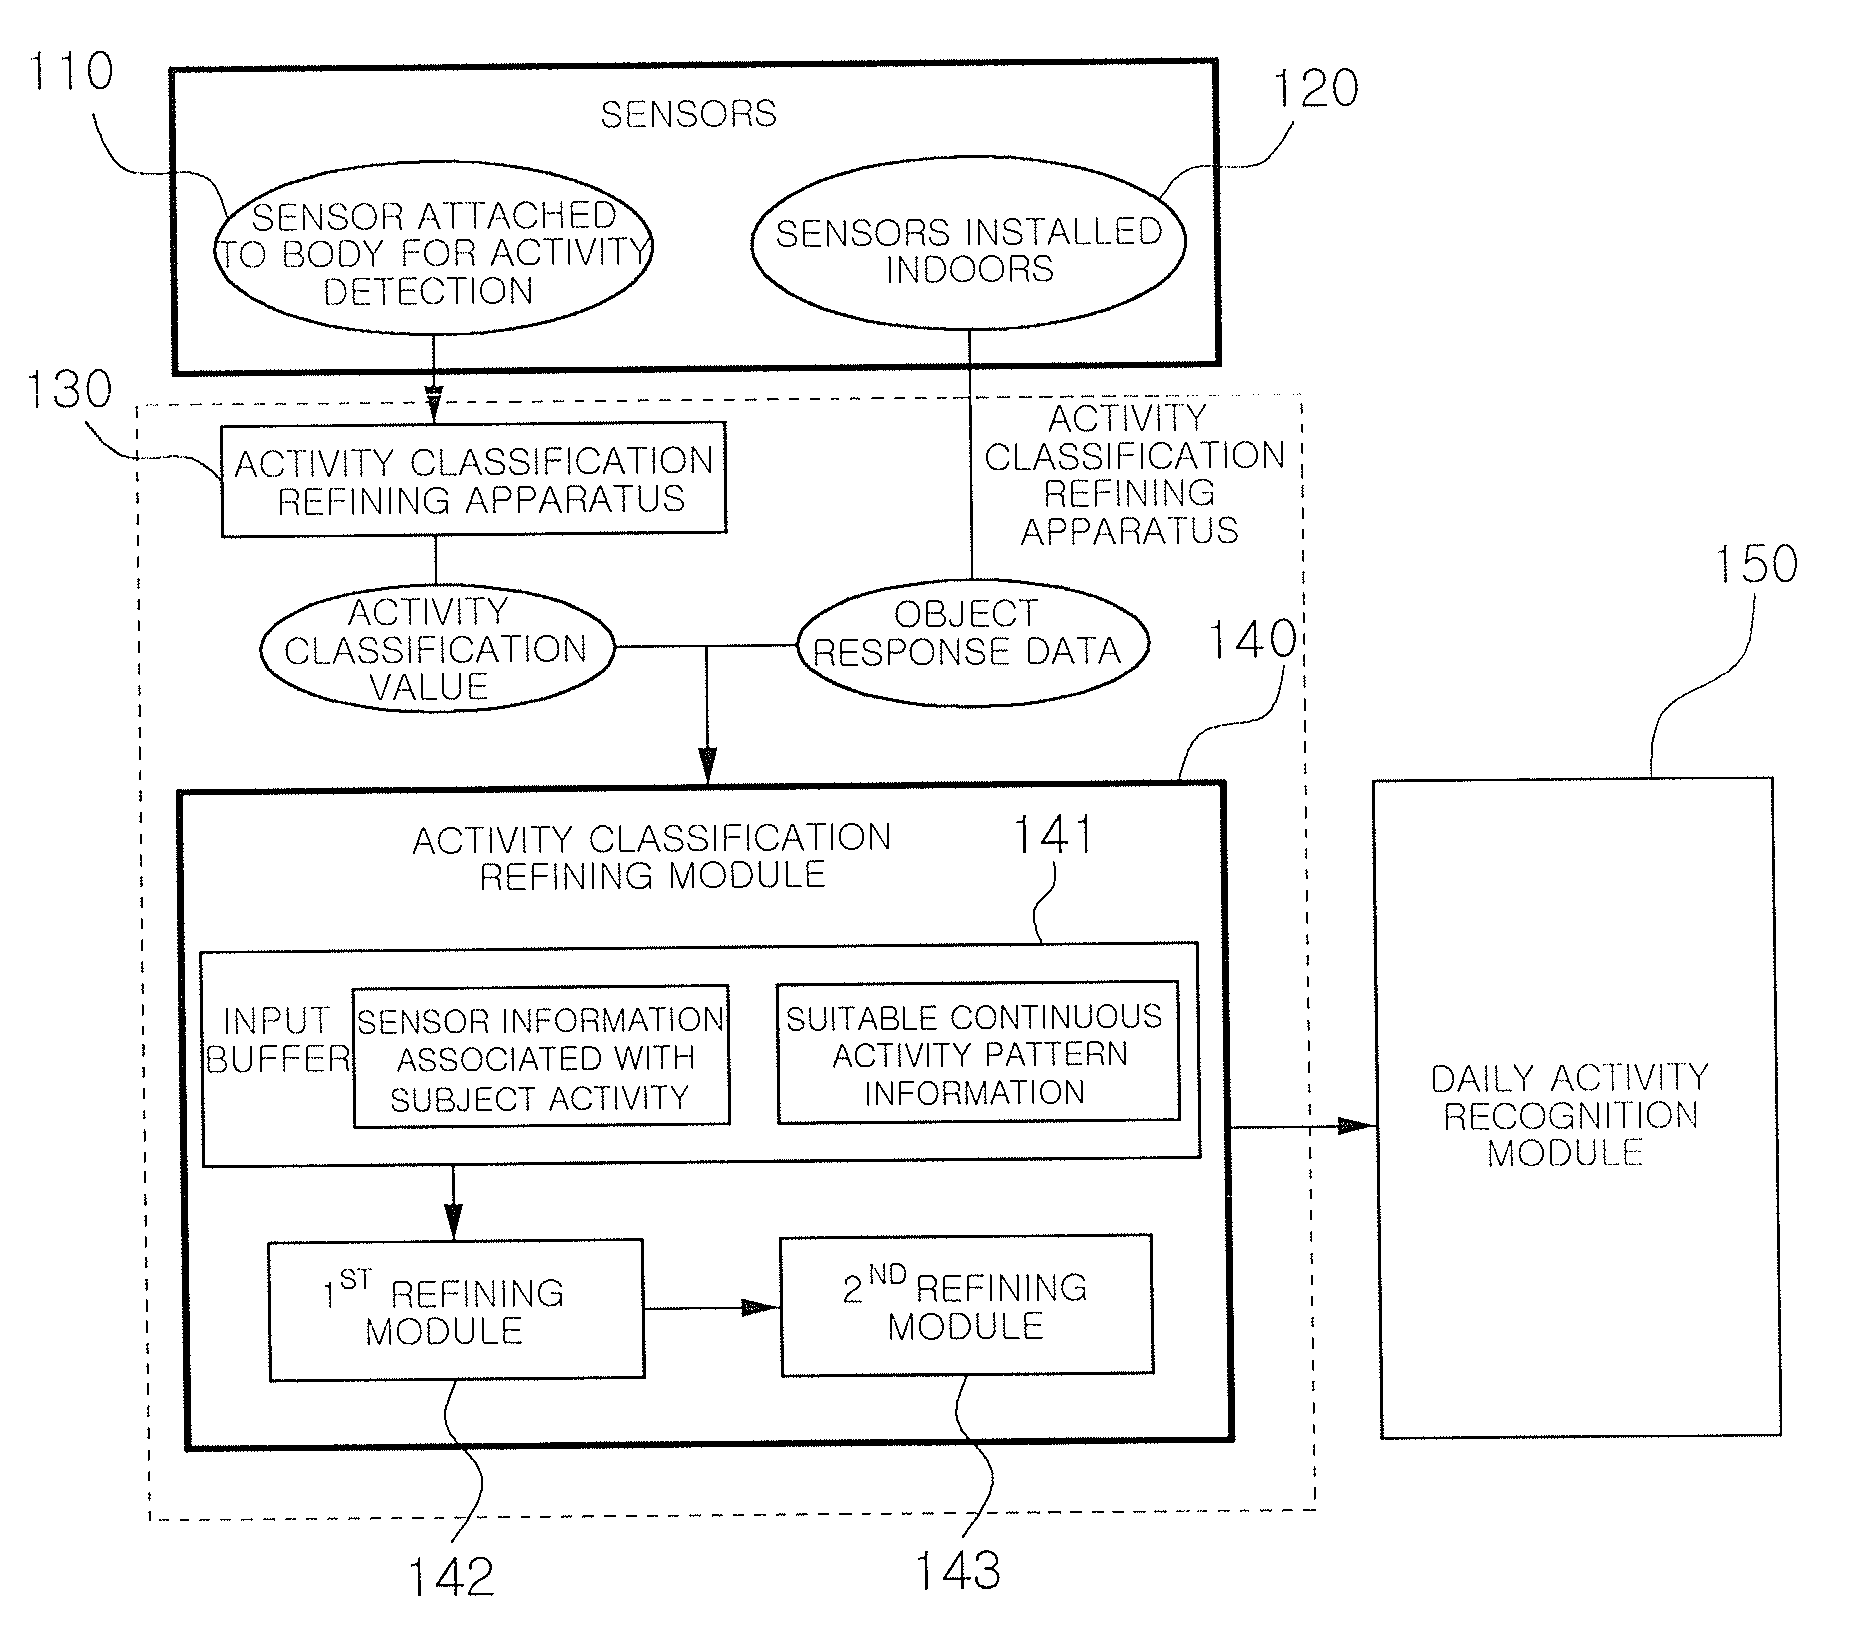 Apparatus and method for refining subject activity classification for recognition of daily activities, and system for recognizing daily activities using the same